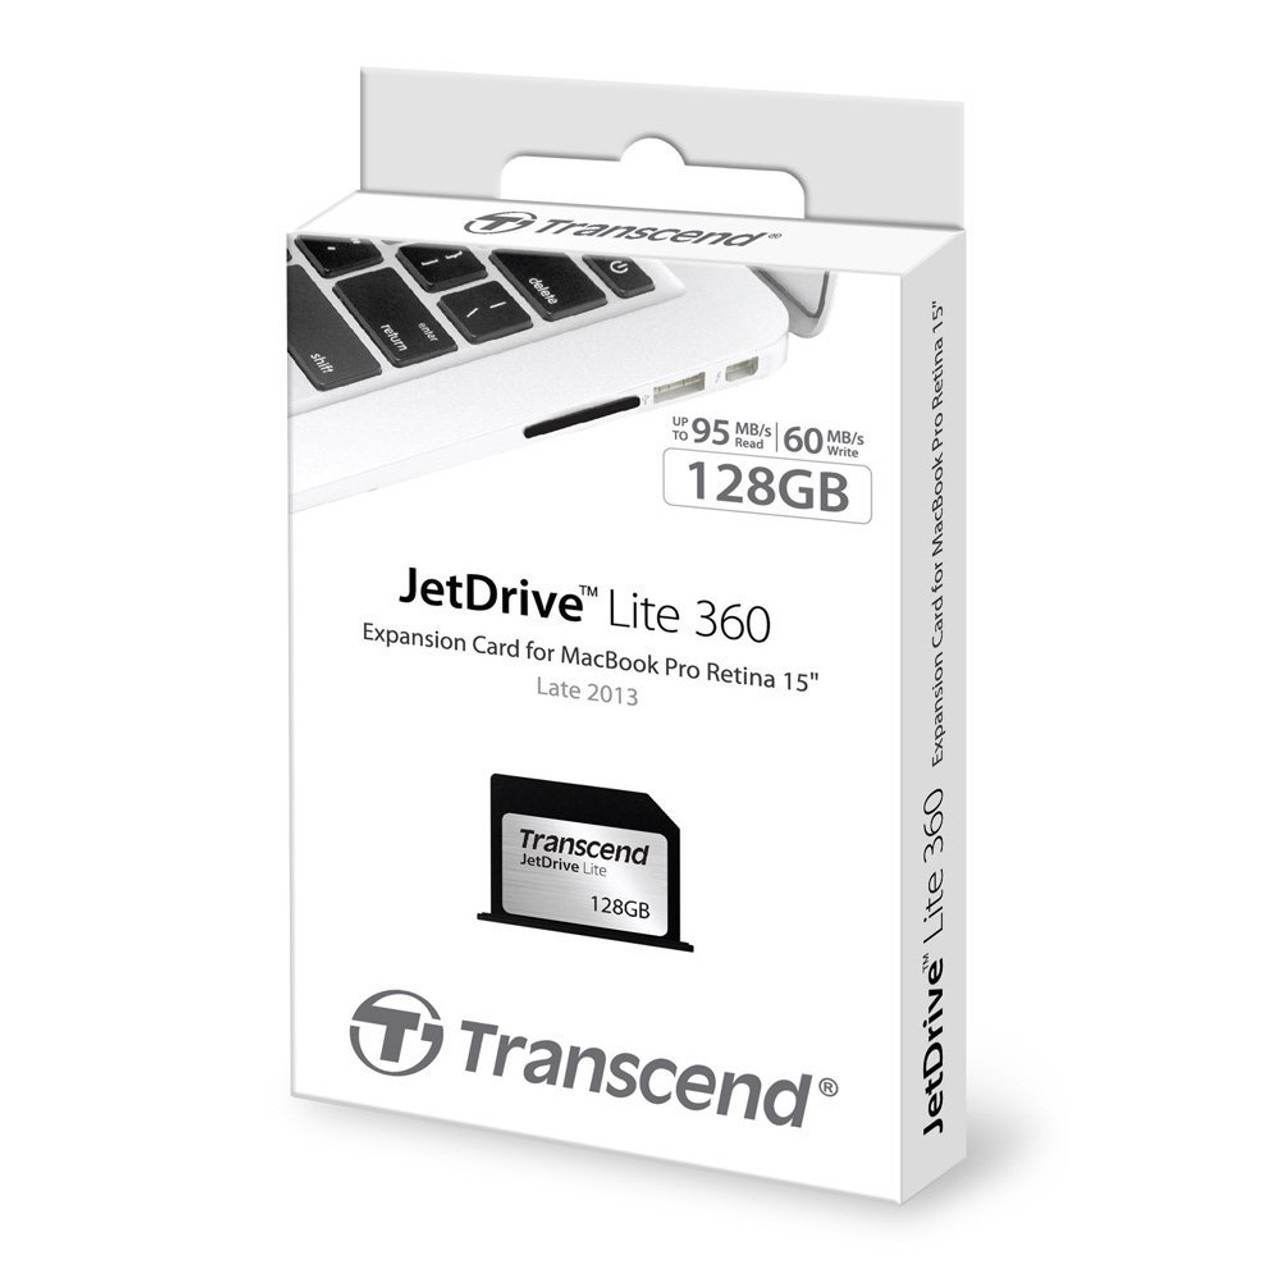 JetDrive™ Lite 360 removable storage expansion card 128GB for Macbook Pro Retina late 2013 and Mid 2014 (TS128GJDL360)